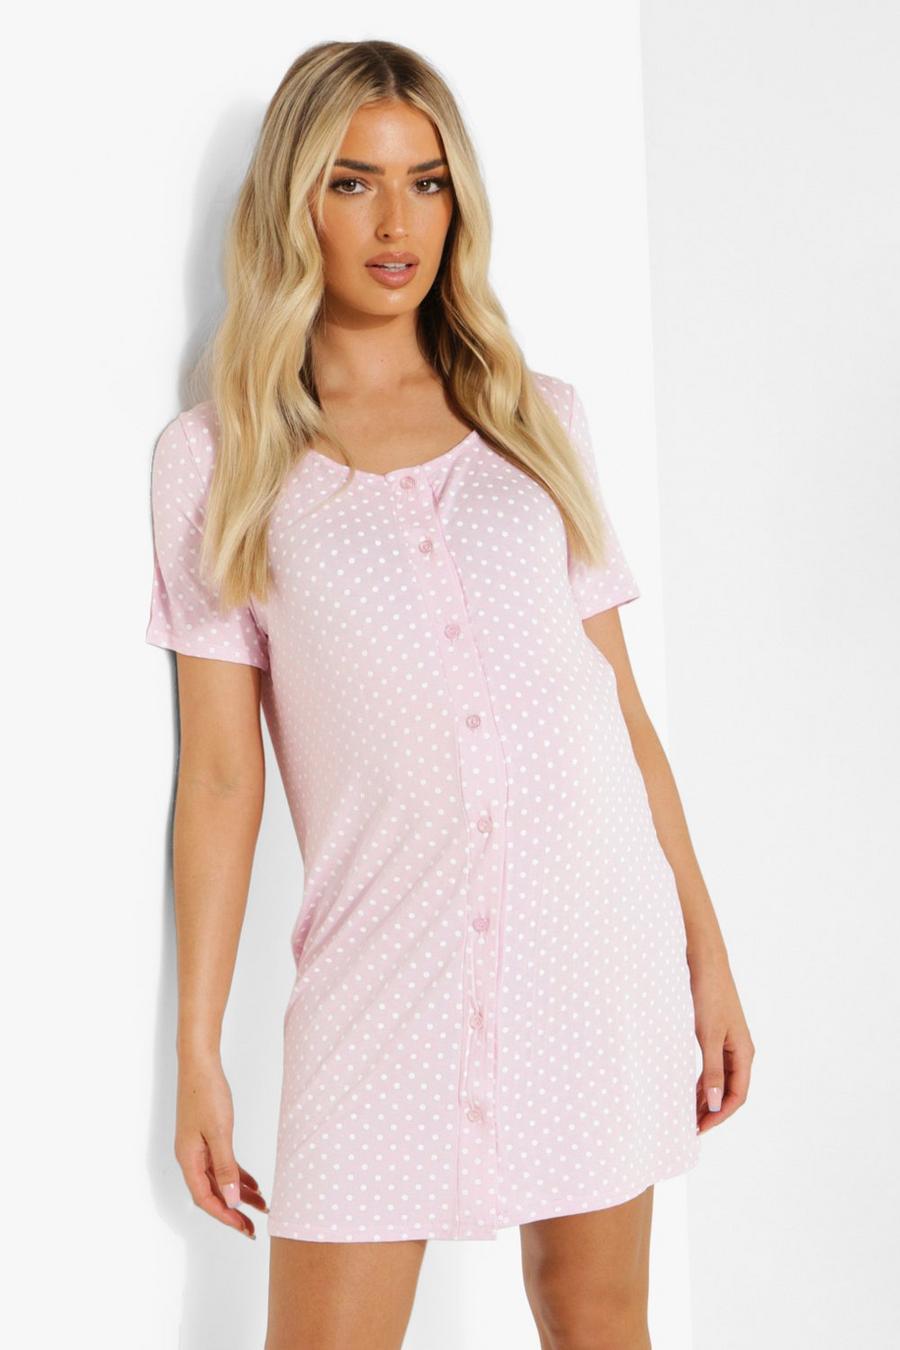 Baby pink rose Maternity Polka Dot Button Front Nightie